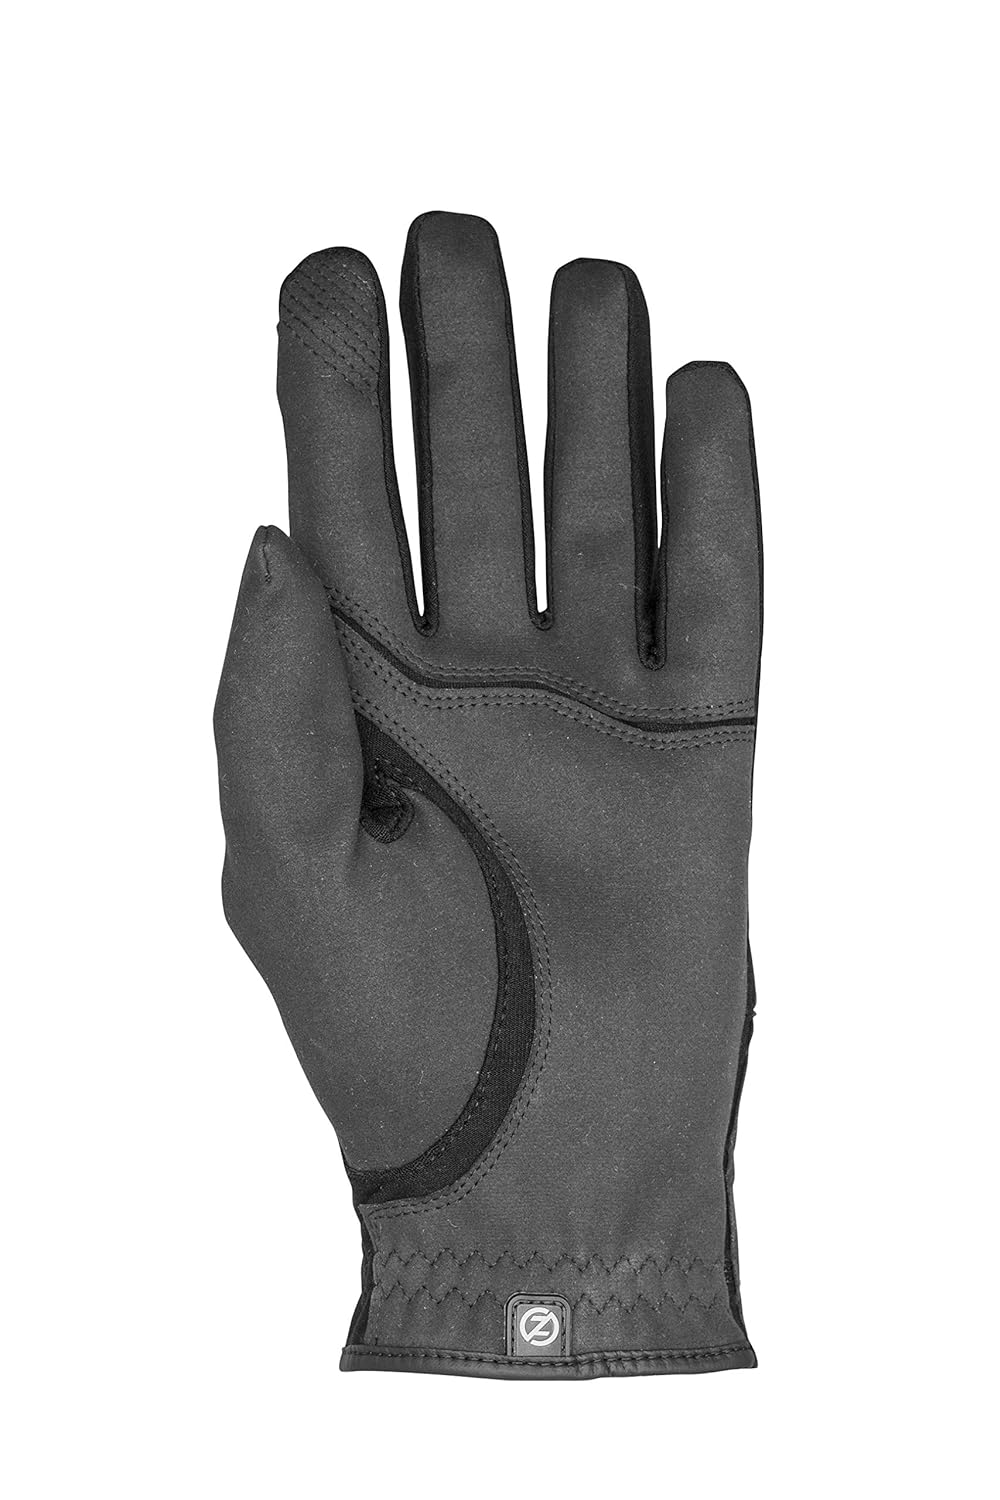 Zero Friction Mens Storm All Weather Gloves